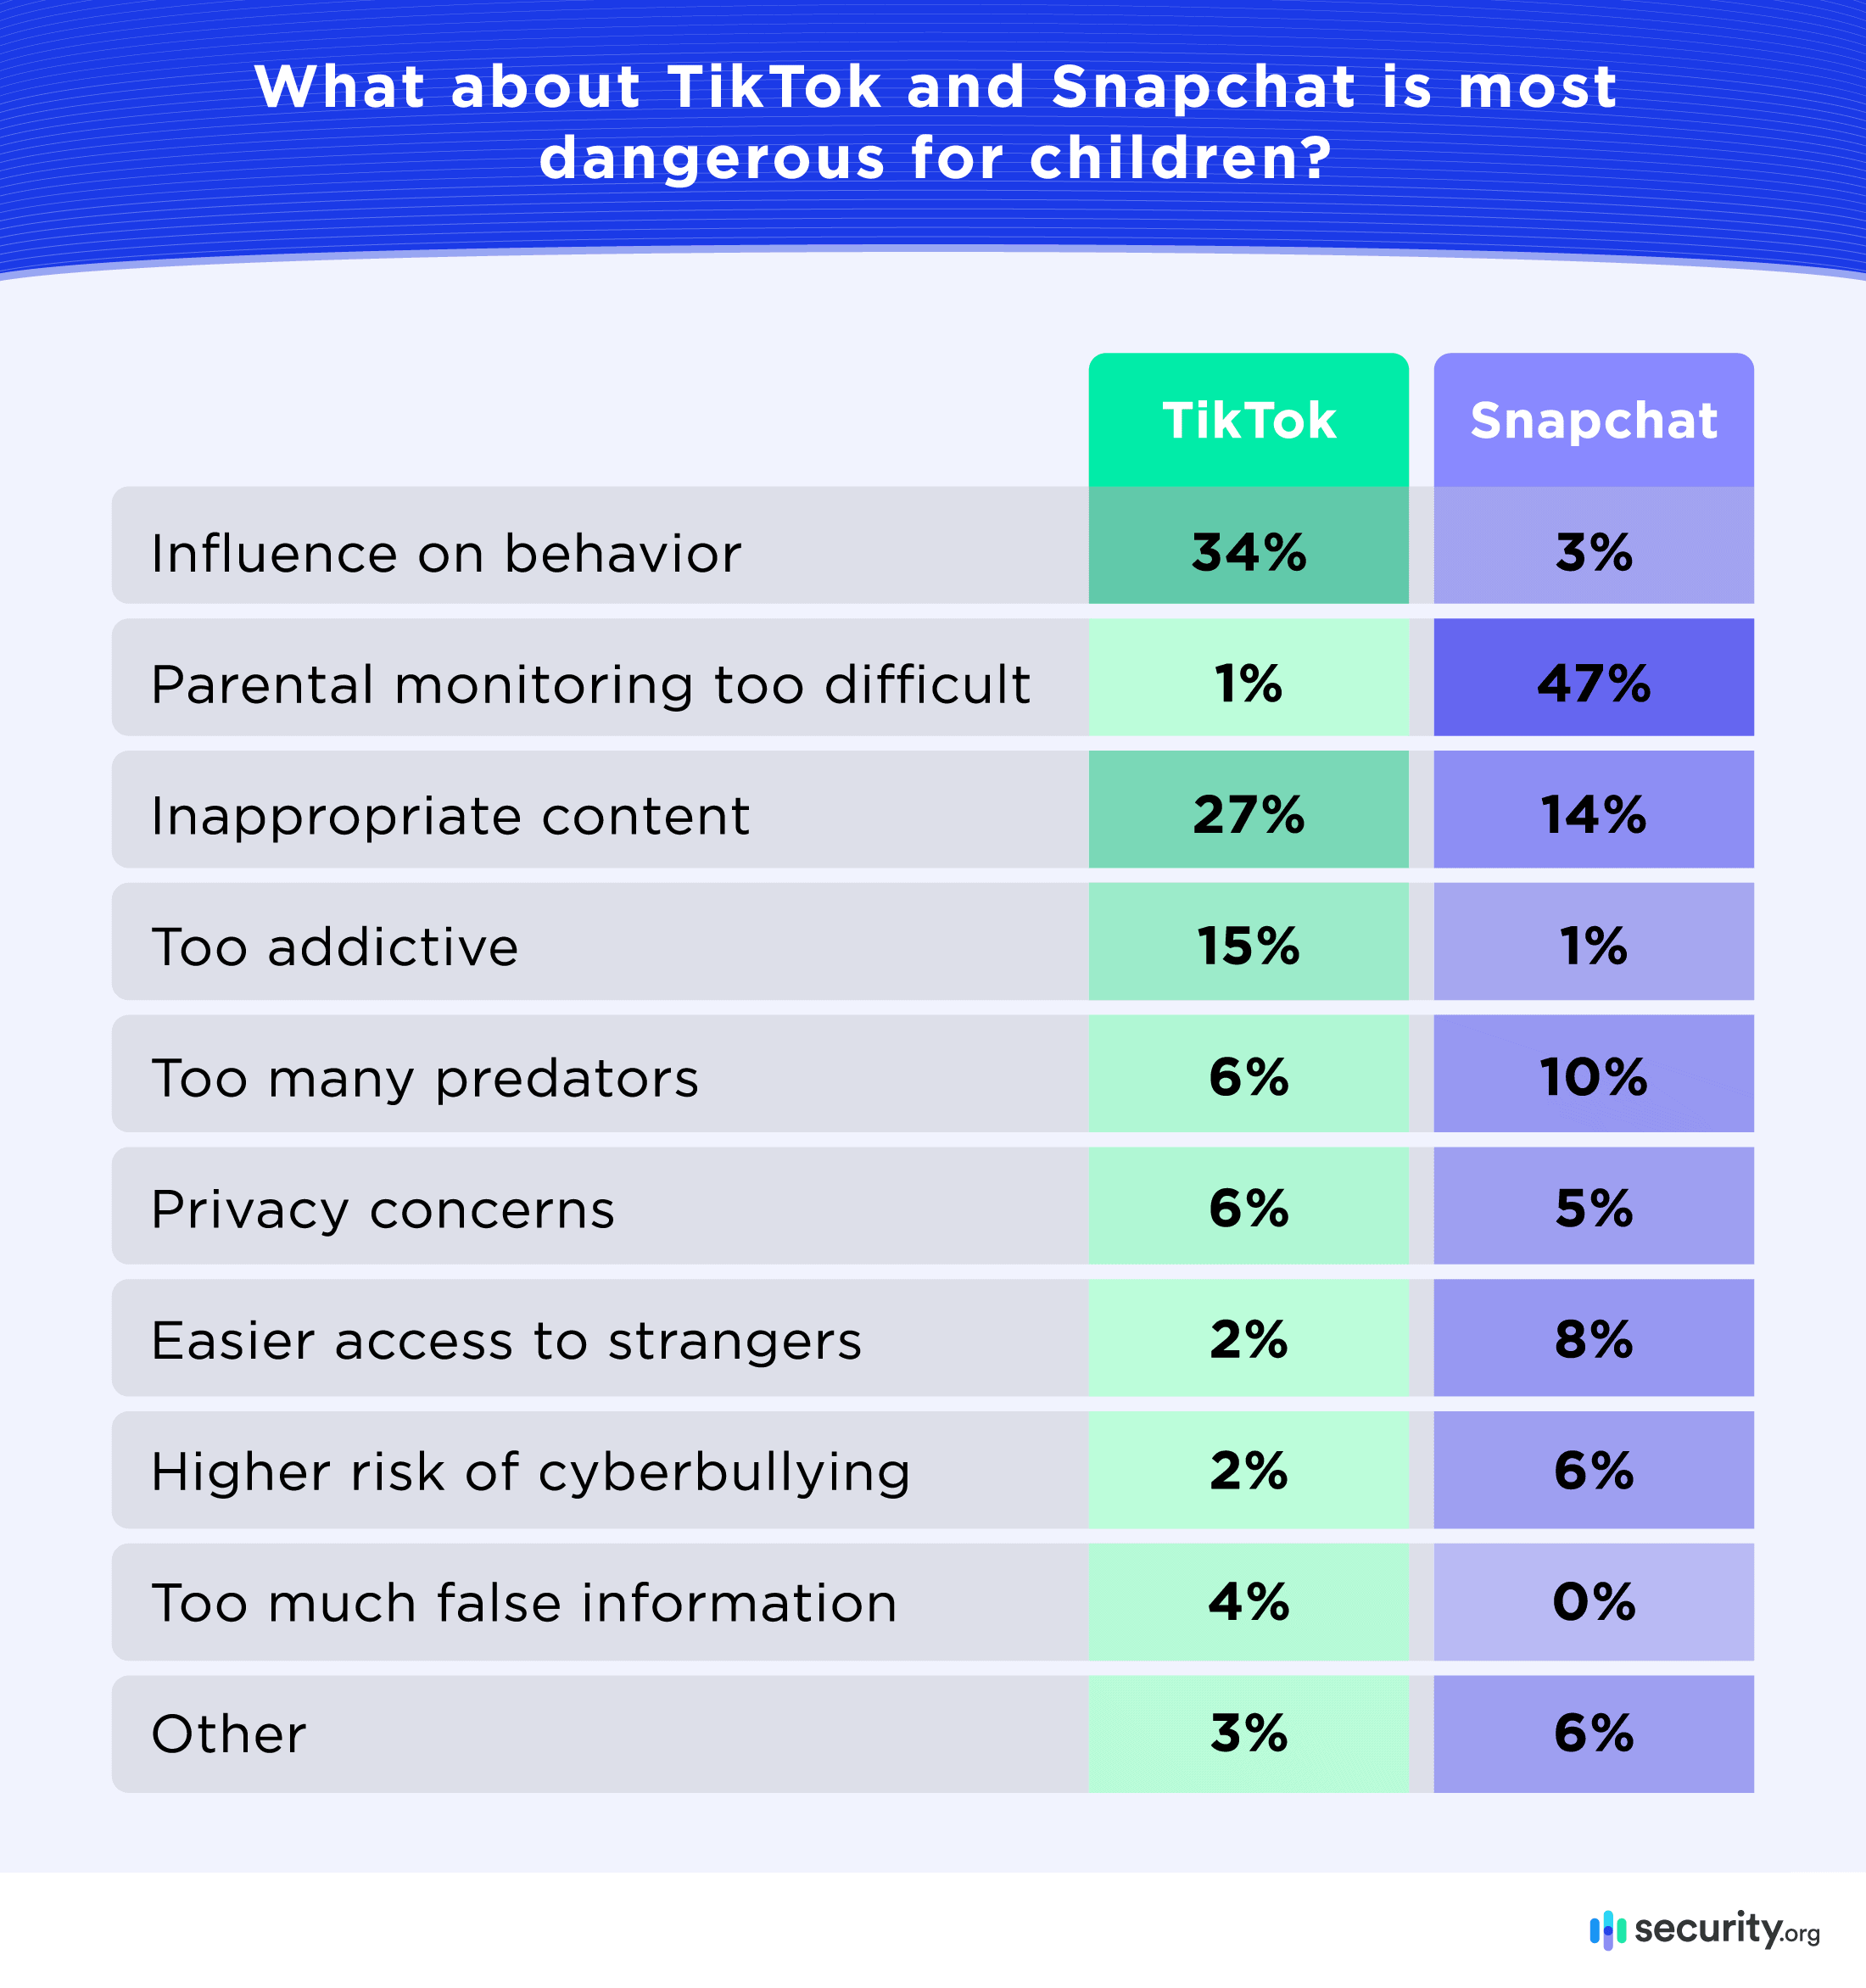 What about TikTok and Snapchat is most dangerous for children - bar graph